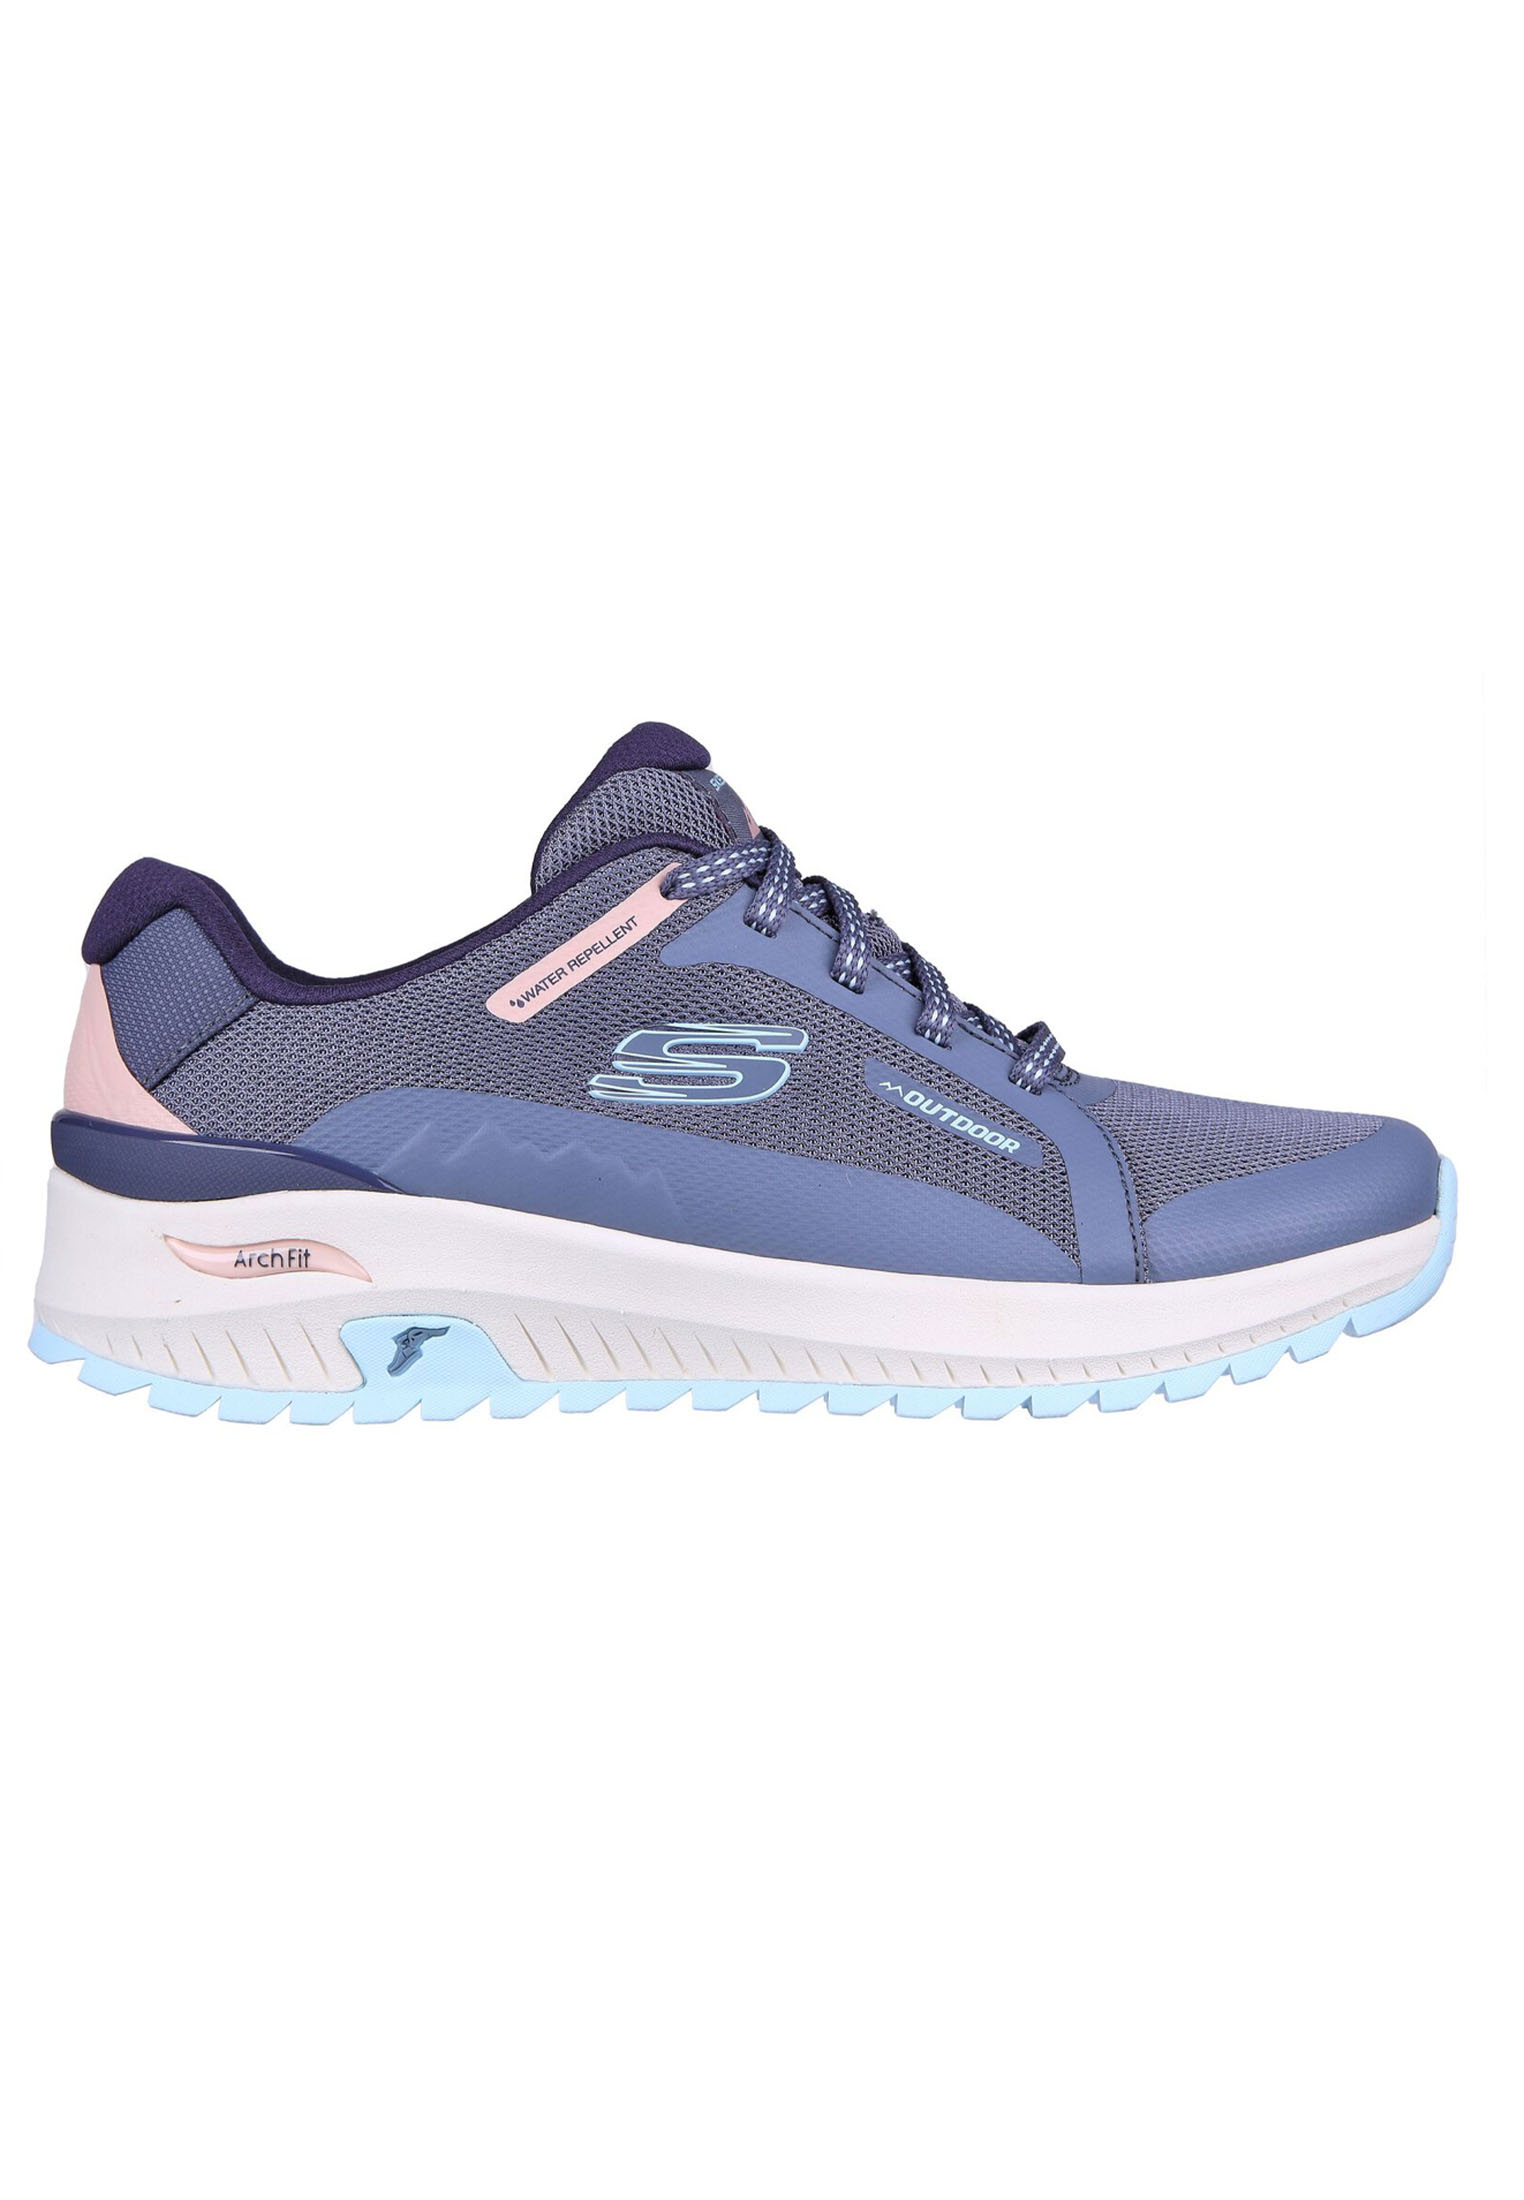 Skechers ARCH FIT DISCOVER dames sneakers - Blauw - Maat 38